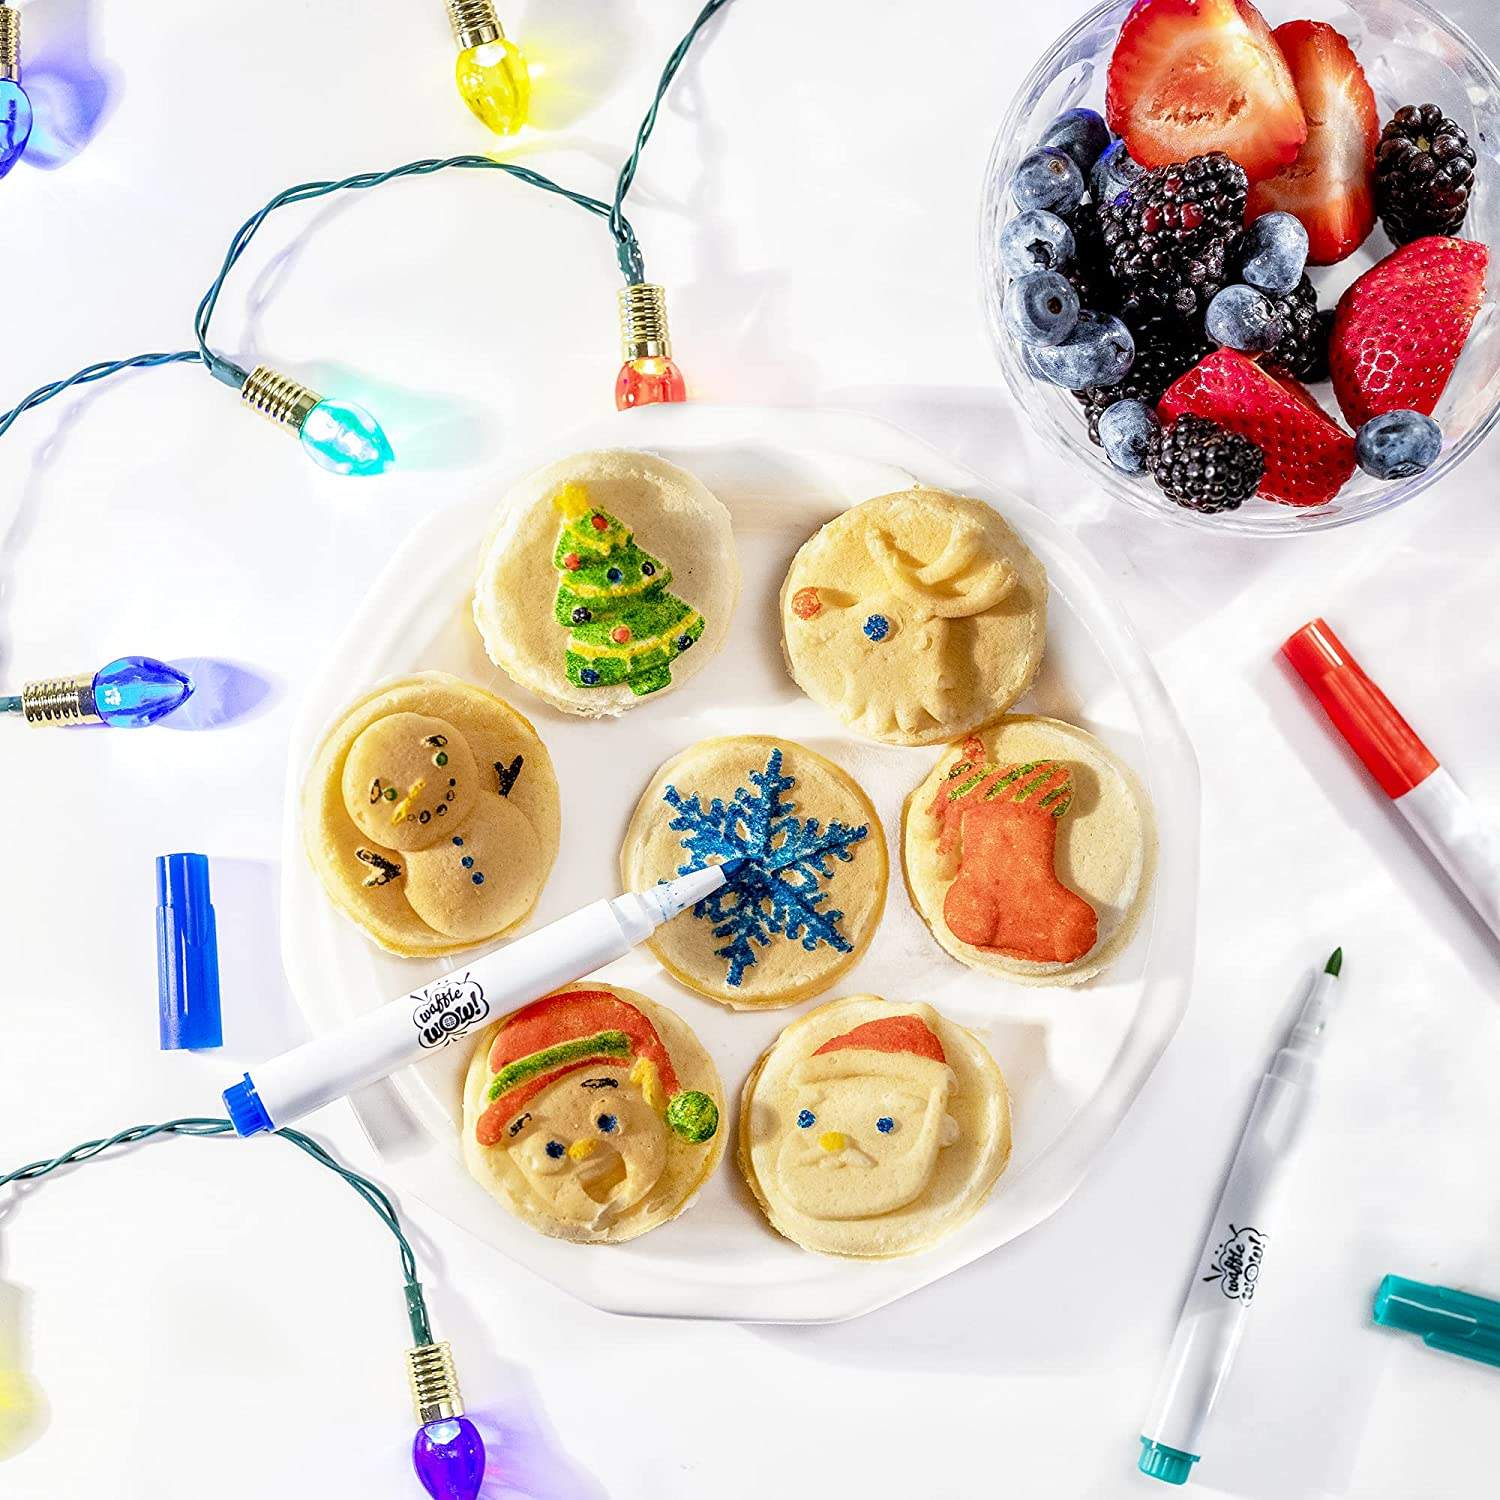 Christmas Cheer Holiday Waffle Maker- Make X-Mas Winter Breakfast Special  w/ Cute Pancakes or Waffles for Kids, Adults - Electric Nonstick Waffler  Iron, Feature